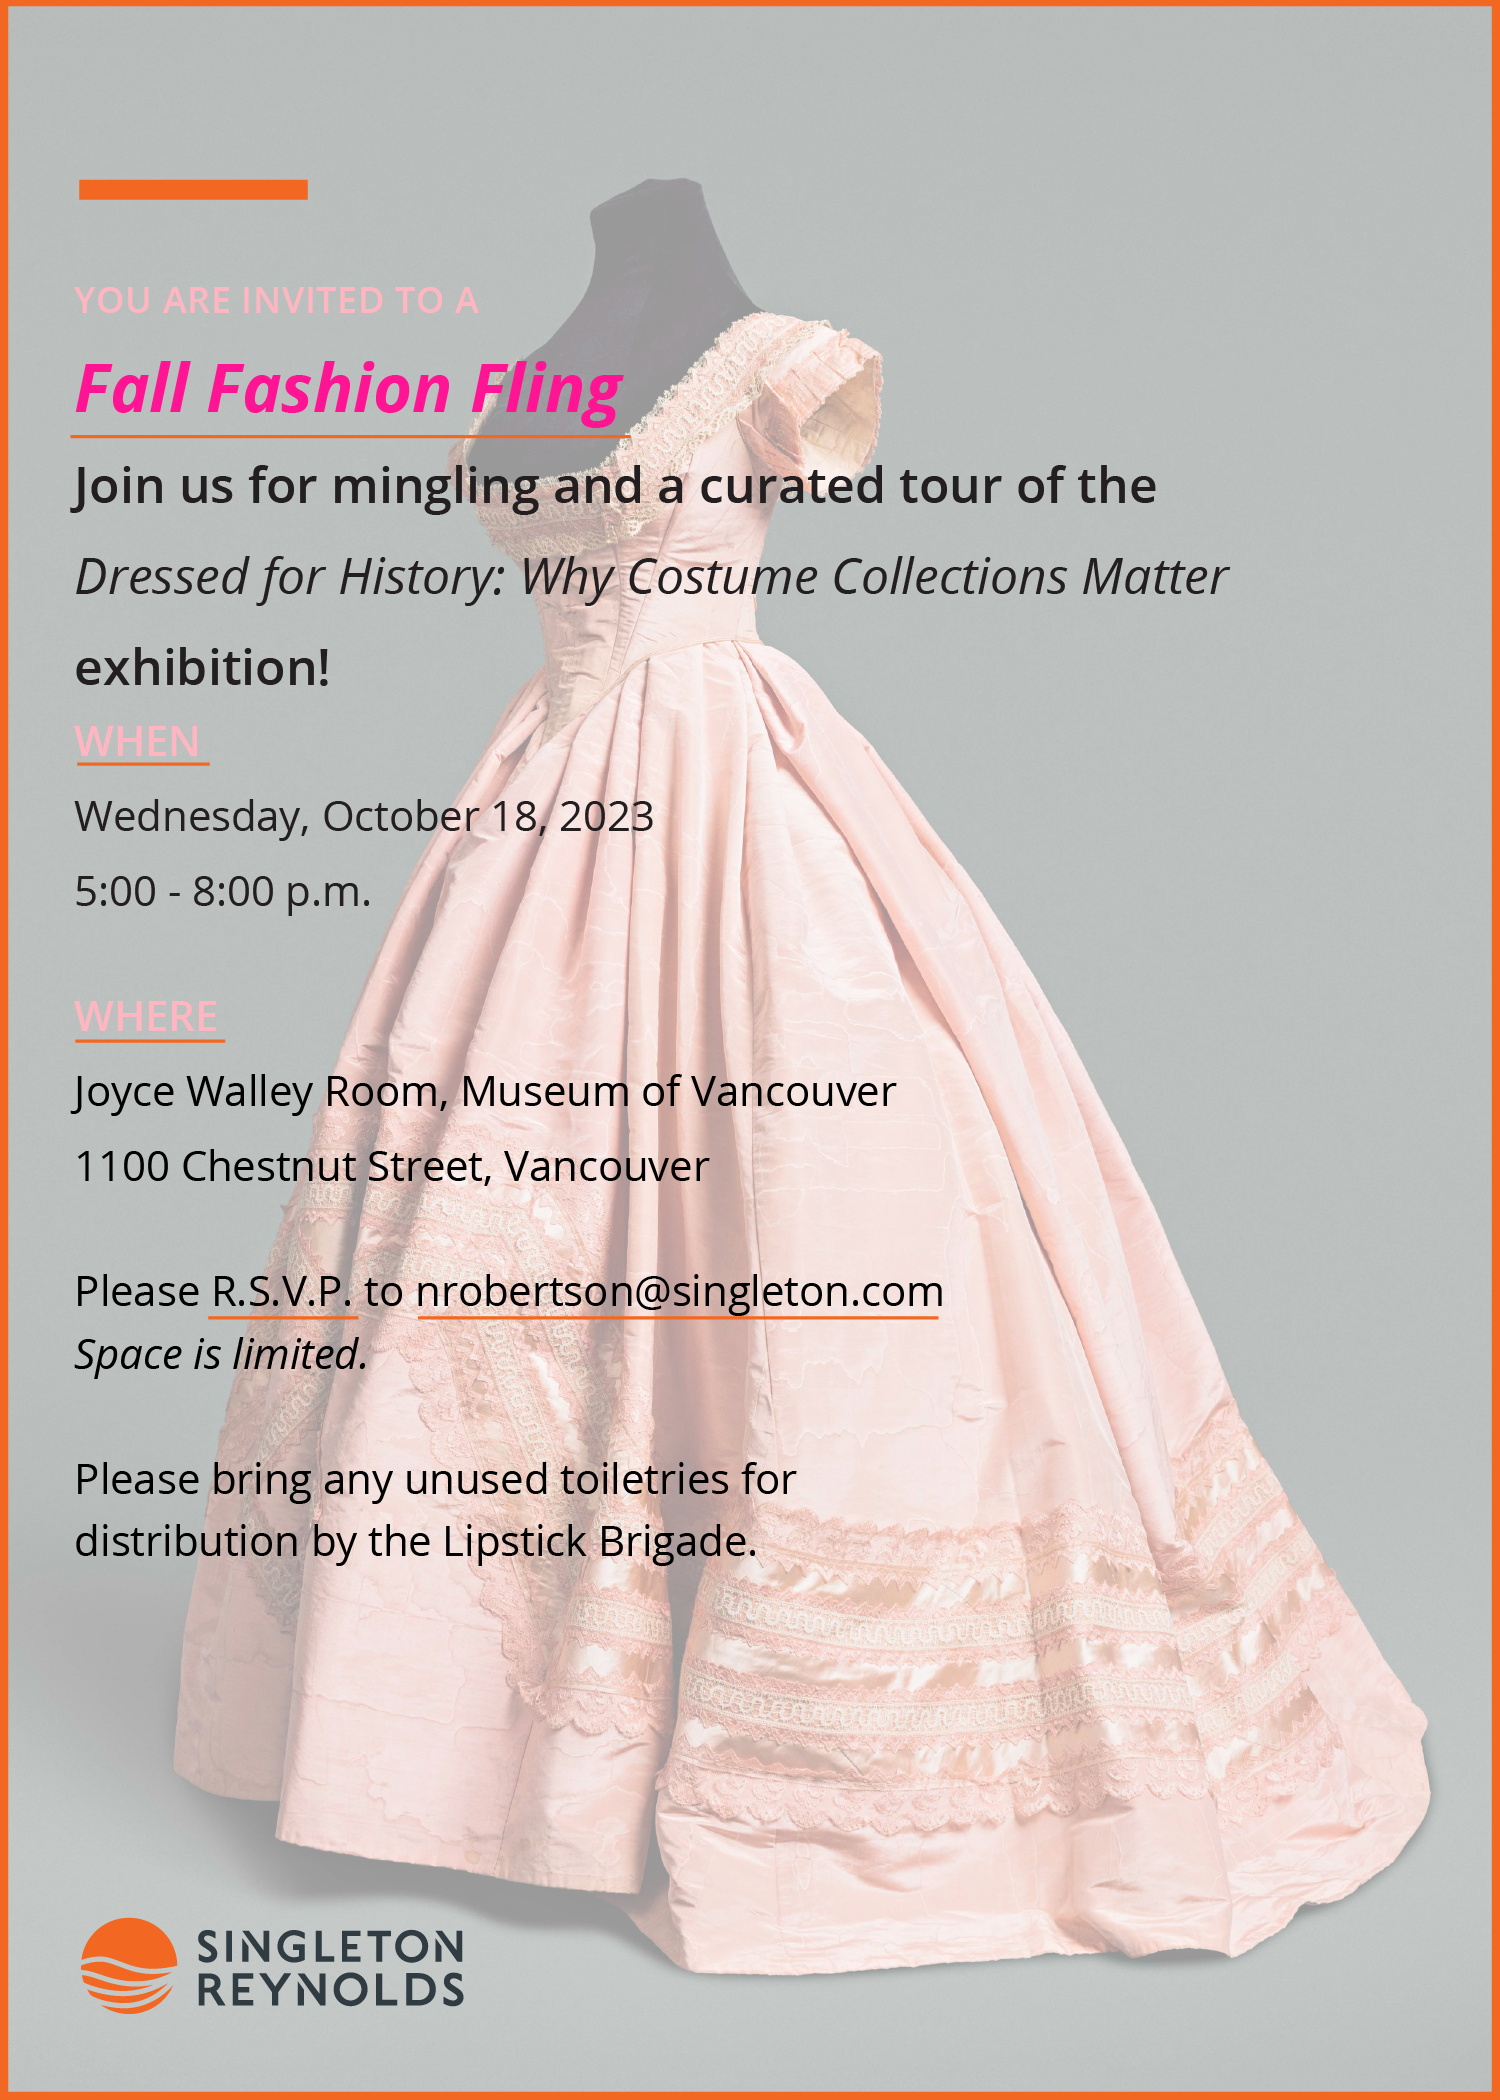 You are Invited to a Fall Fashion Fling.